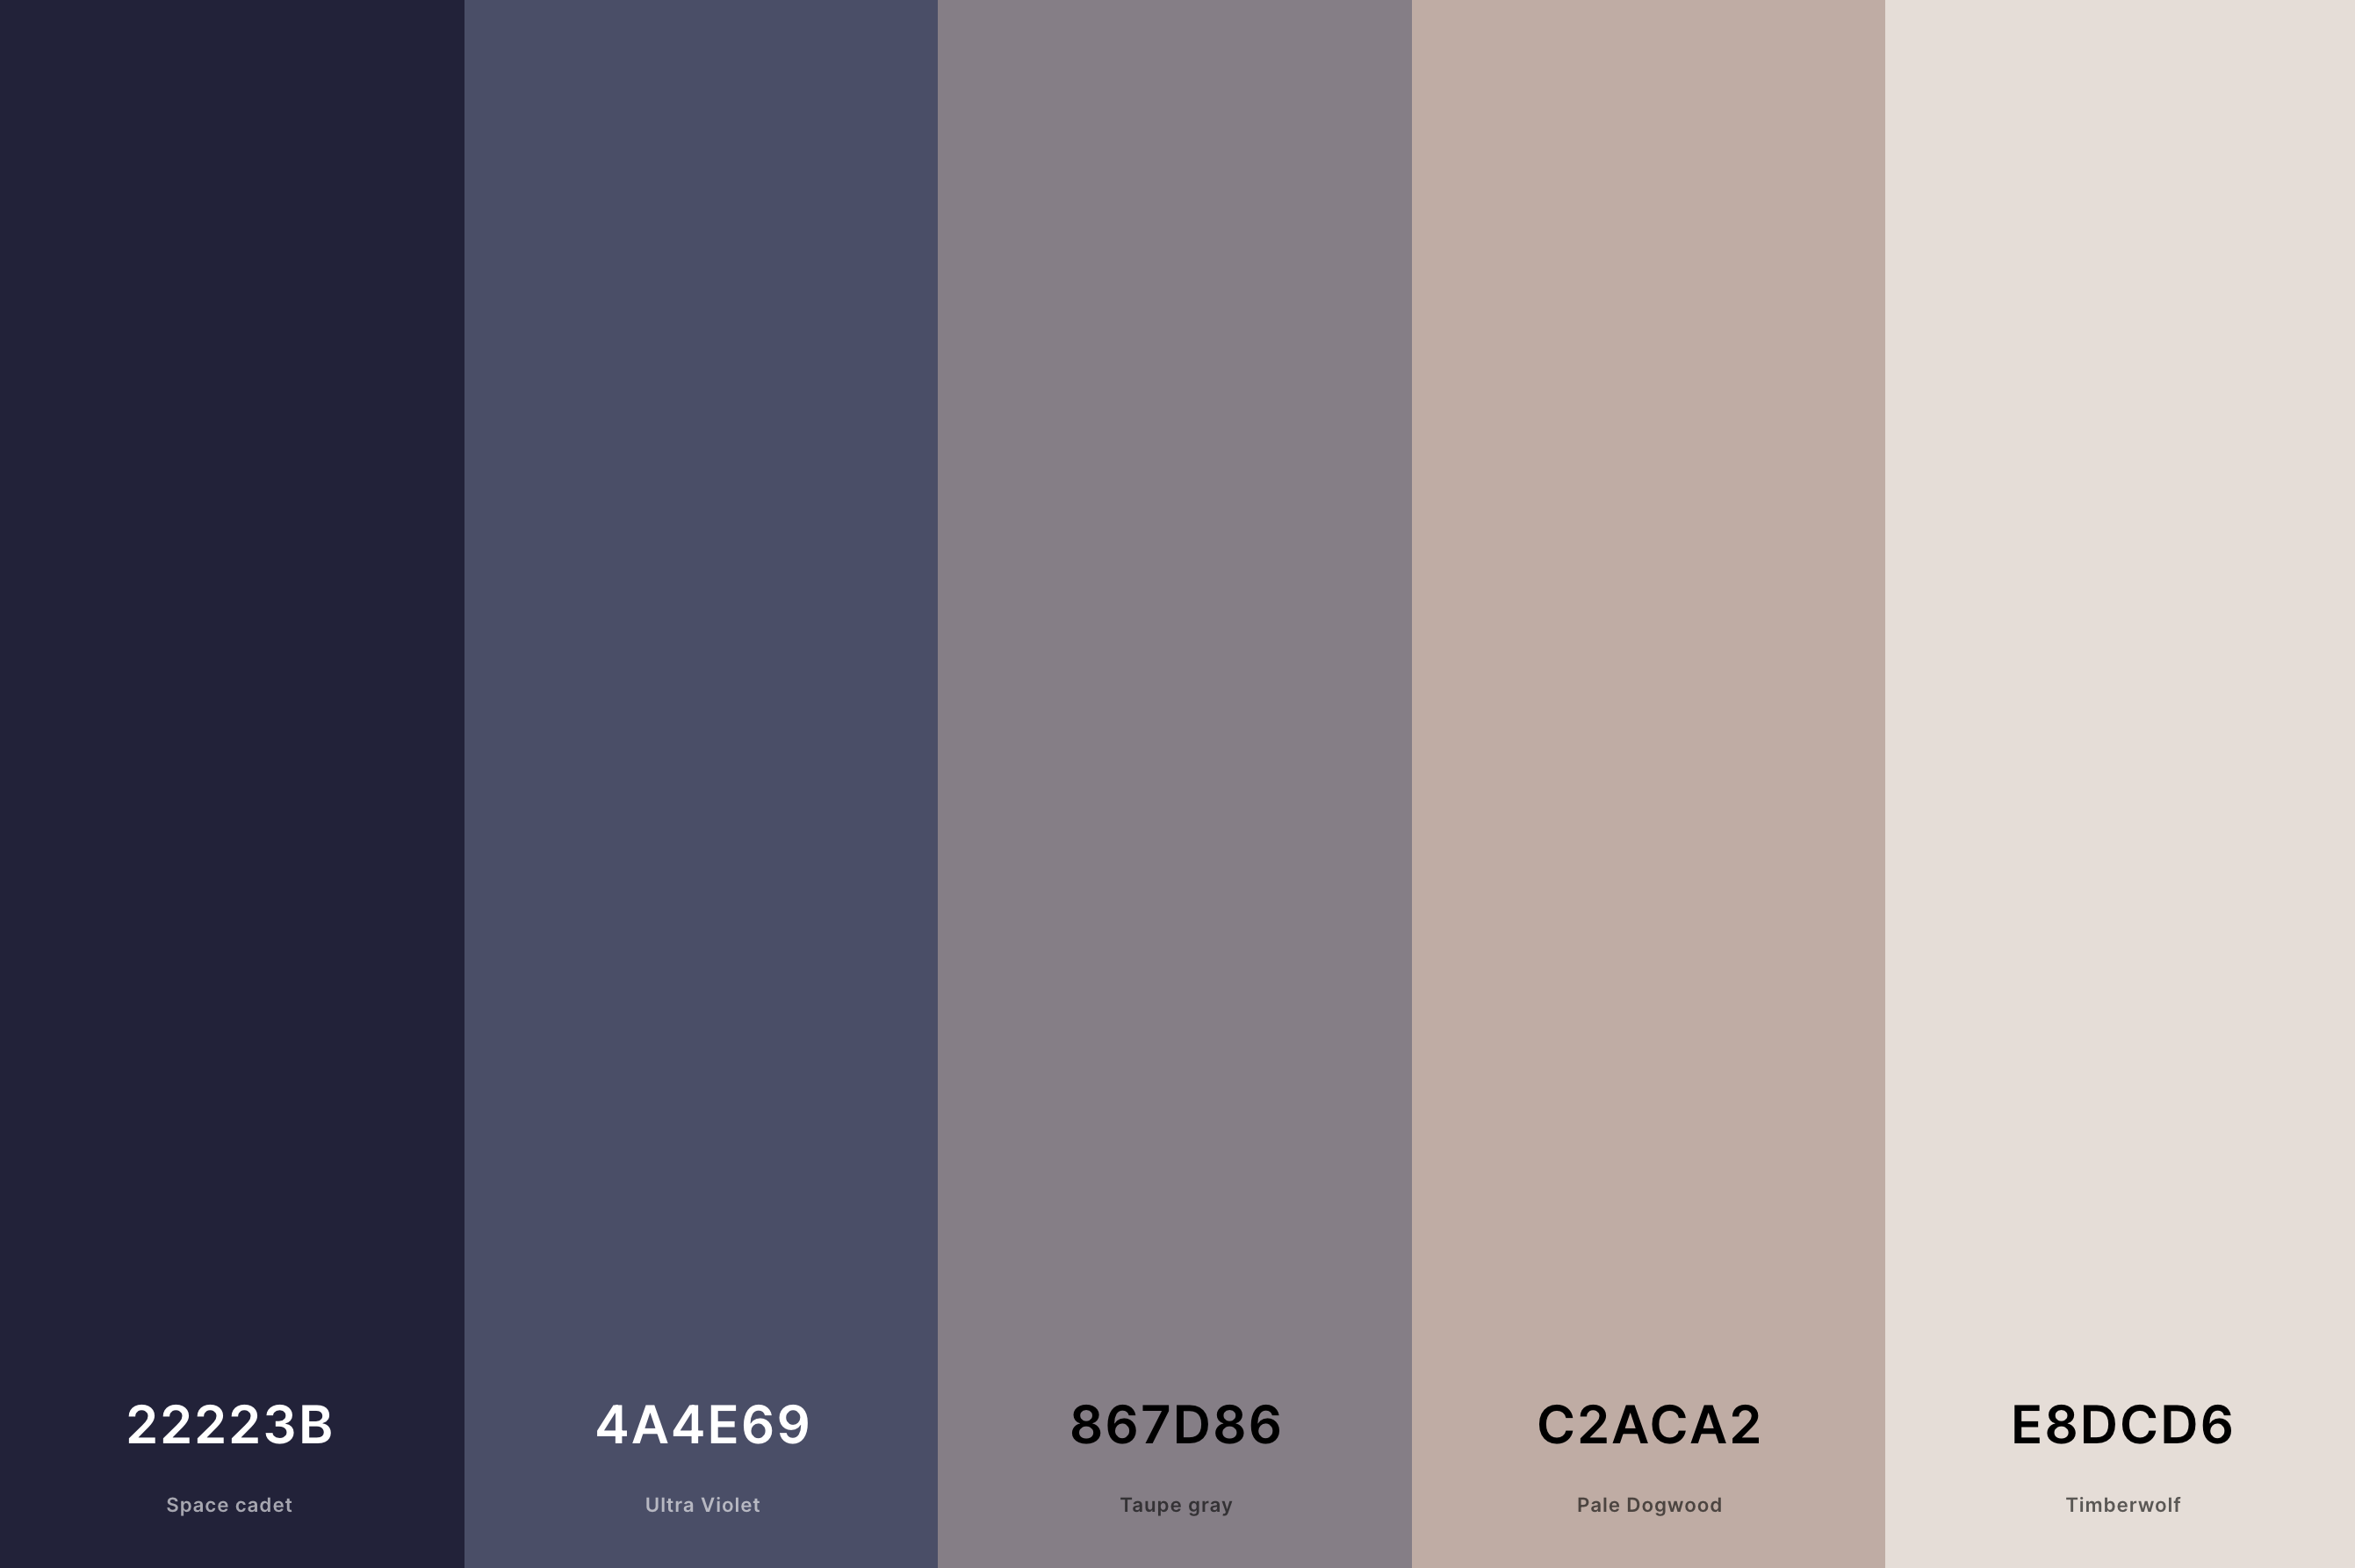 25+ Best Tan Color Palettes with Names and Hex Codes – CreativeBooster